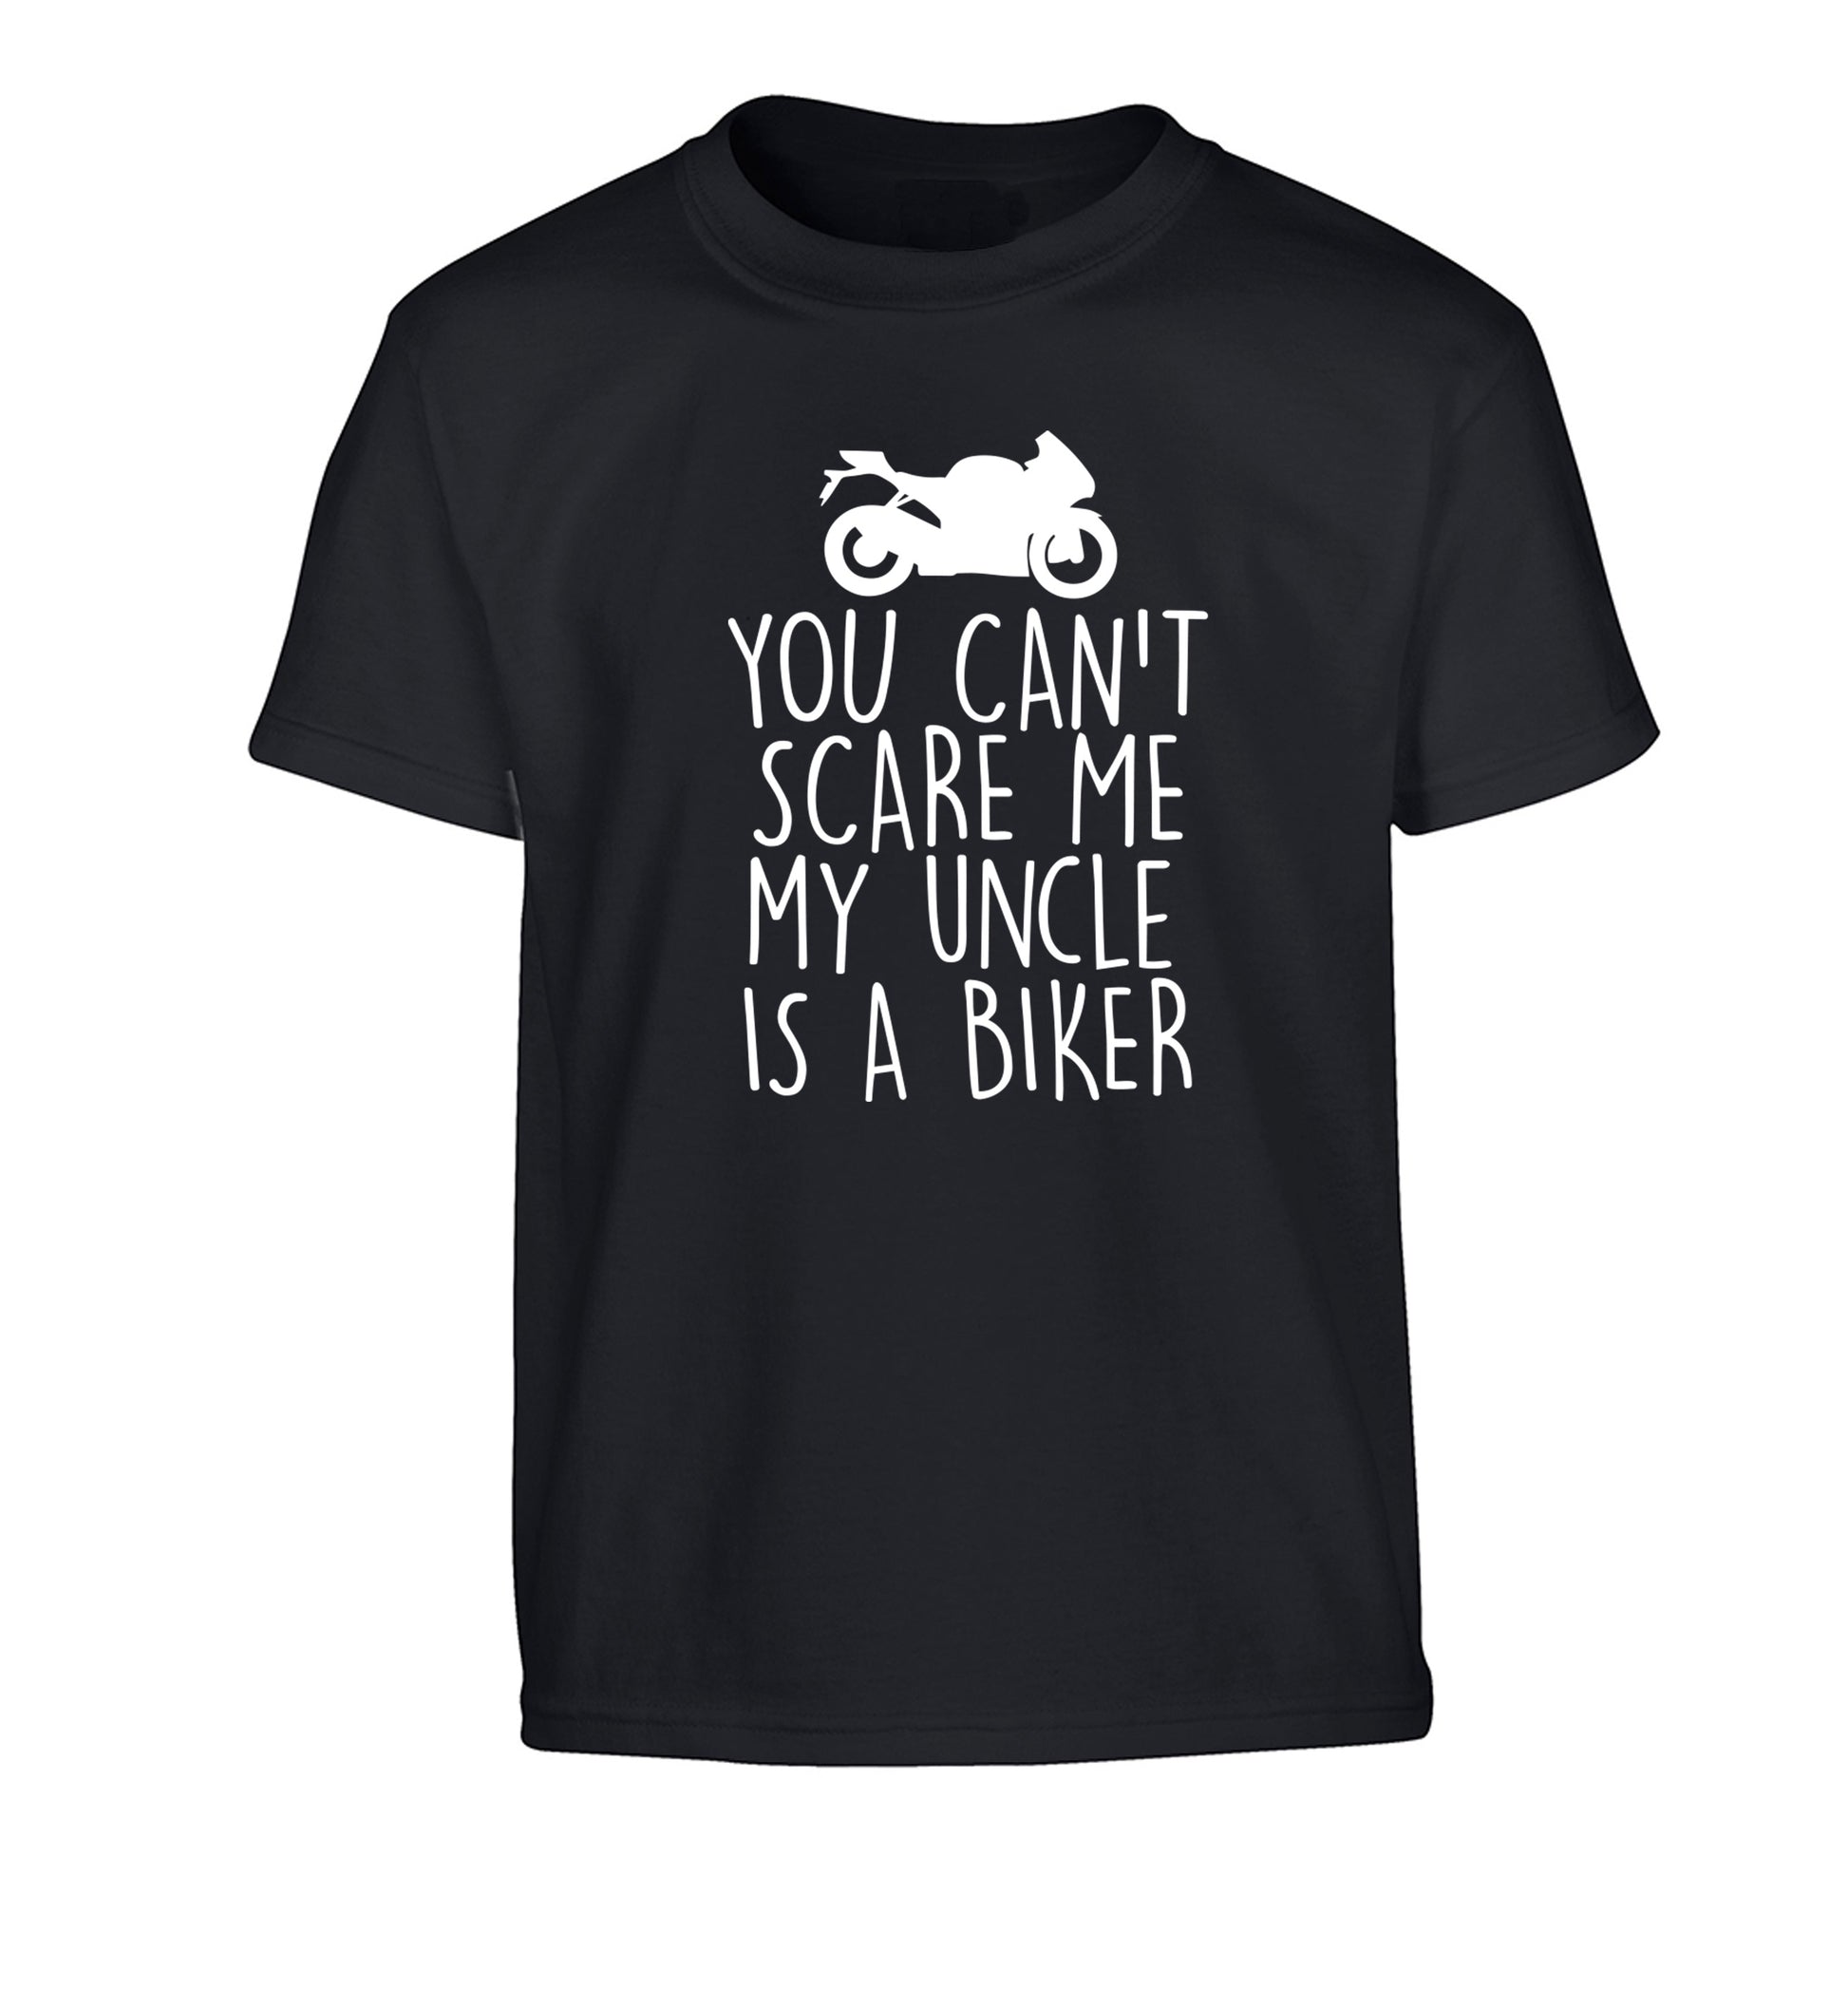 You can't scare me my uncle is a biker Children's black Tshirt 12-13 Years